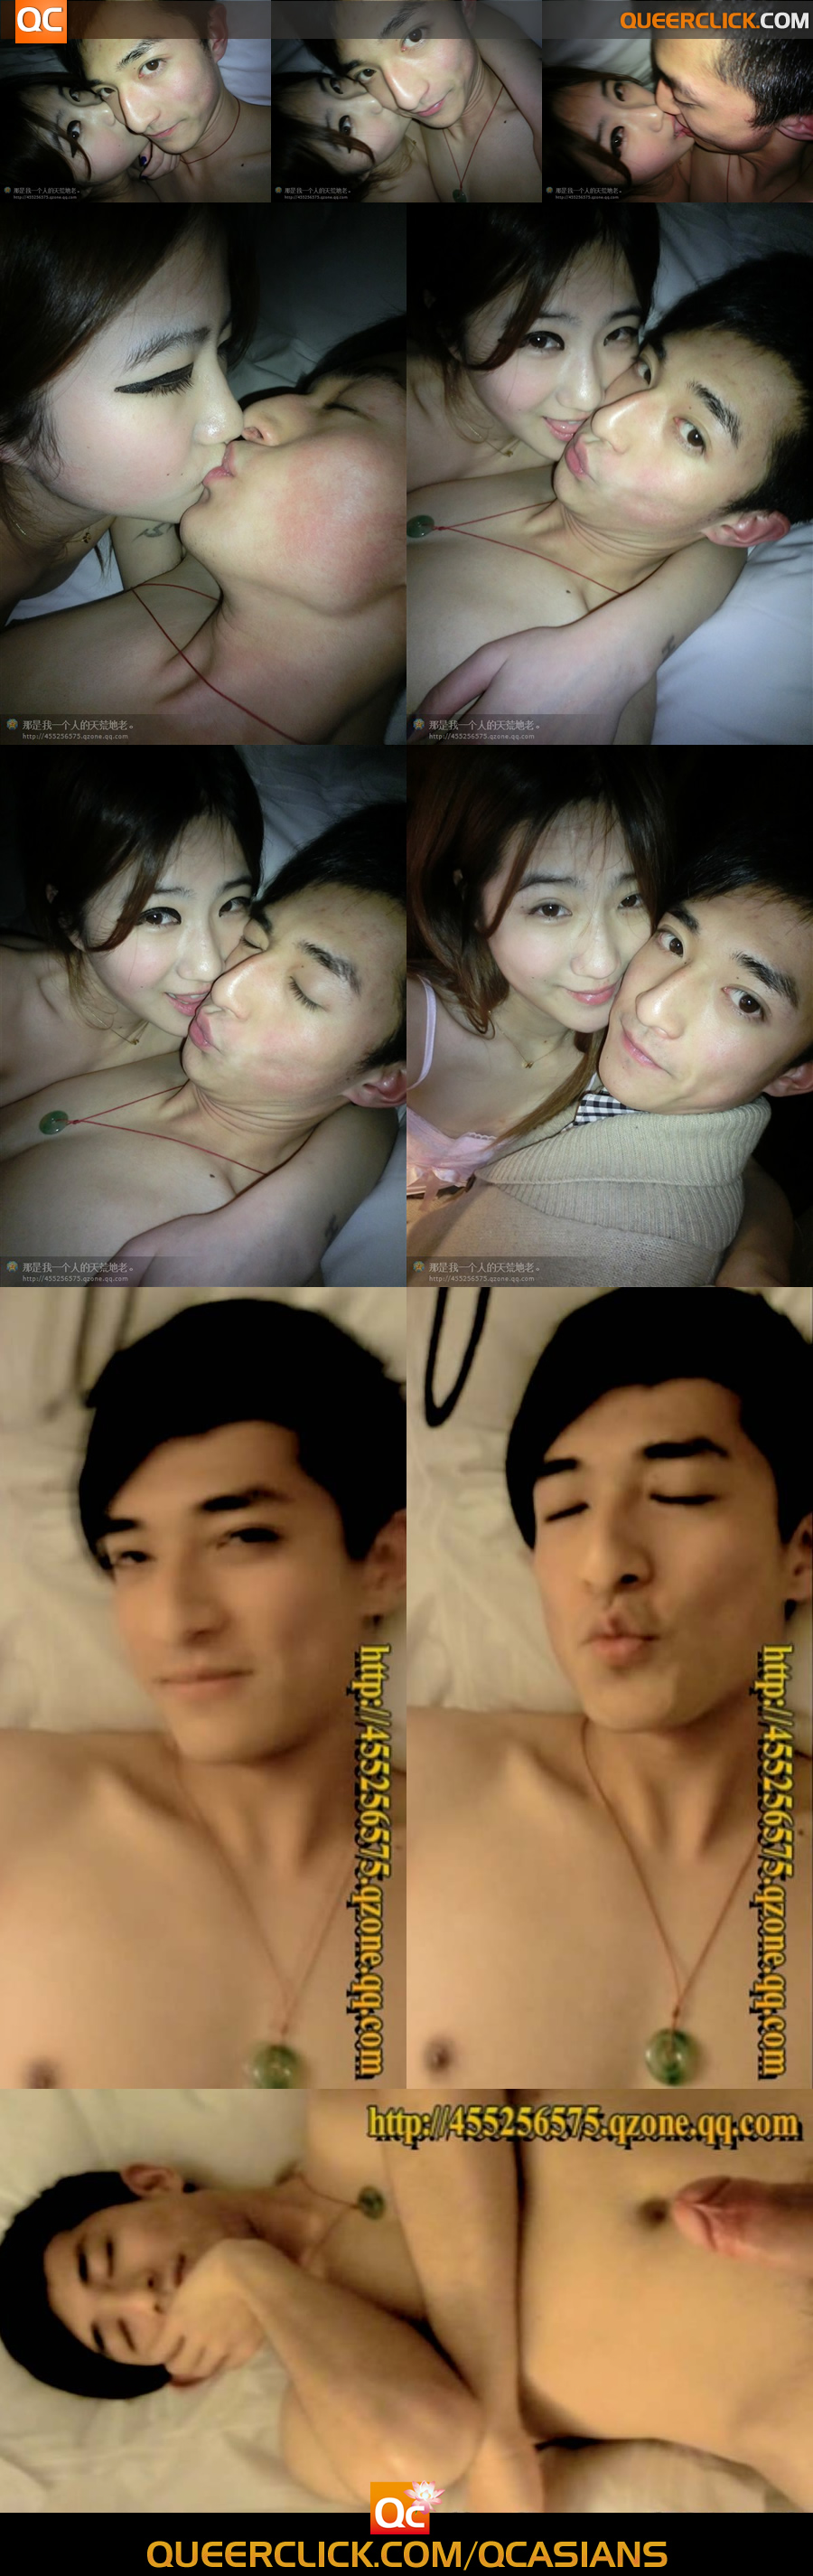 Video Straight Asian Couple Sex Tape Leaked